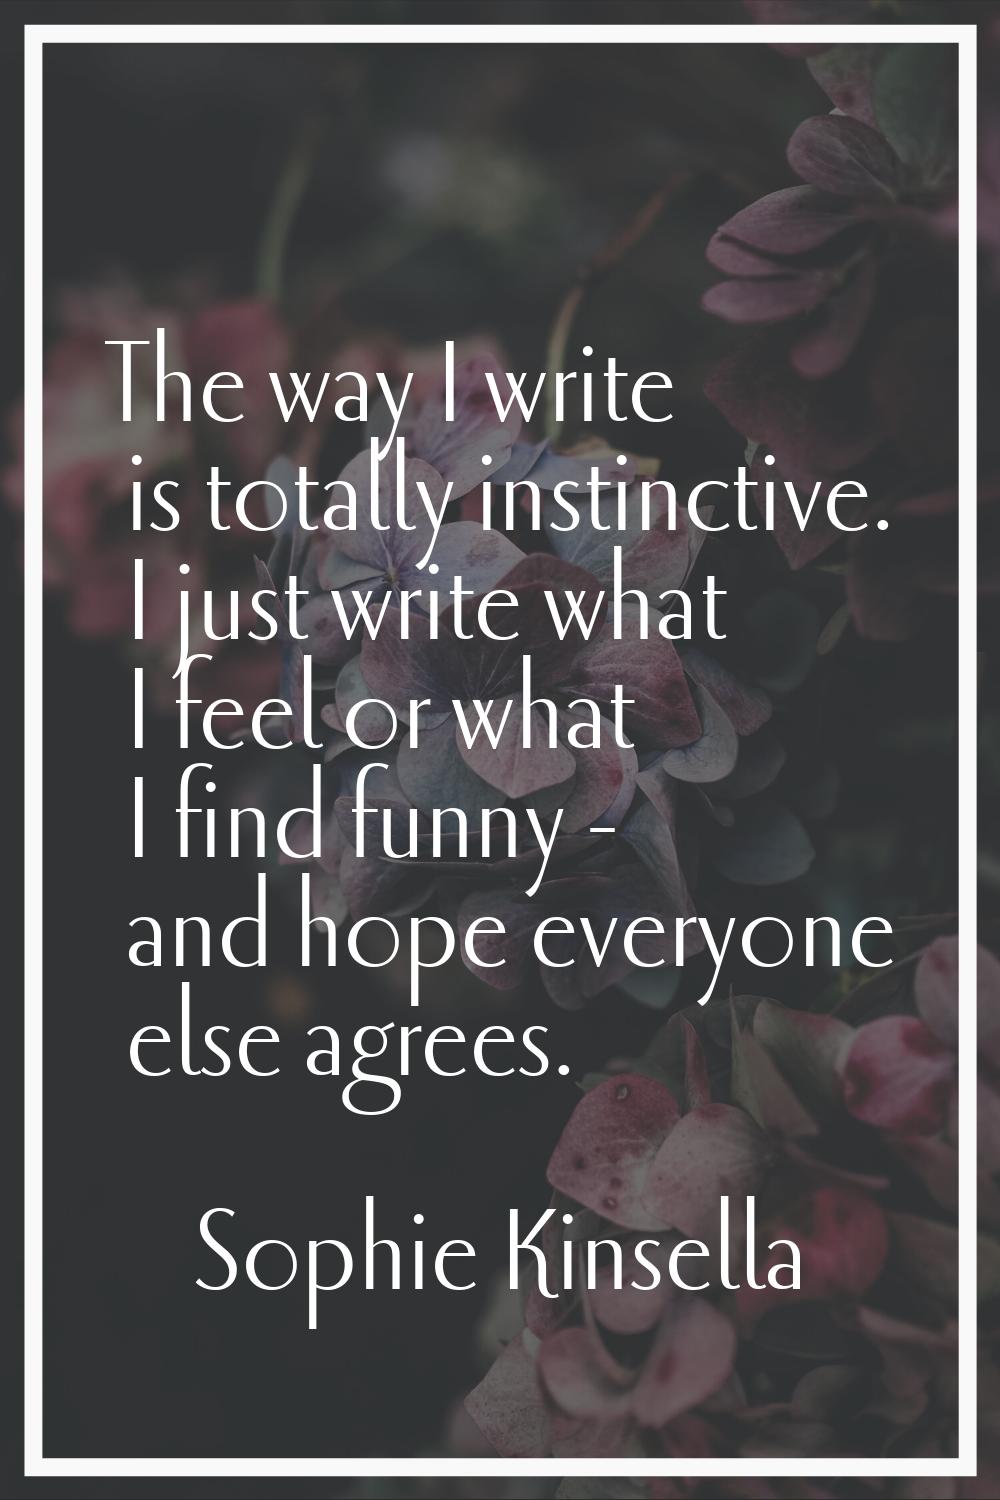 The way I write is totally instinctive. I just write what I feel or what I find funny - and hope ev